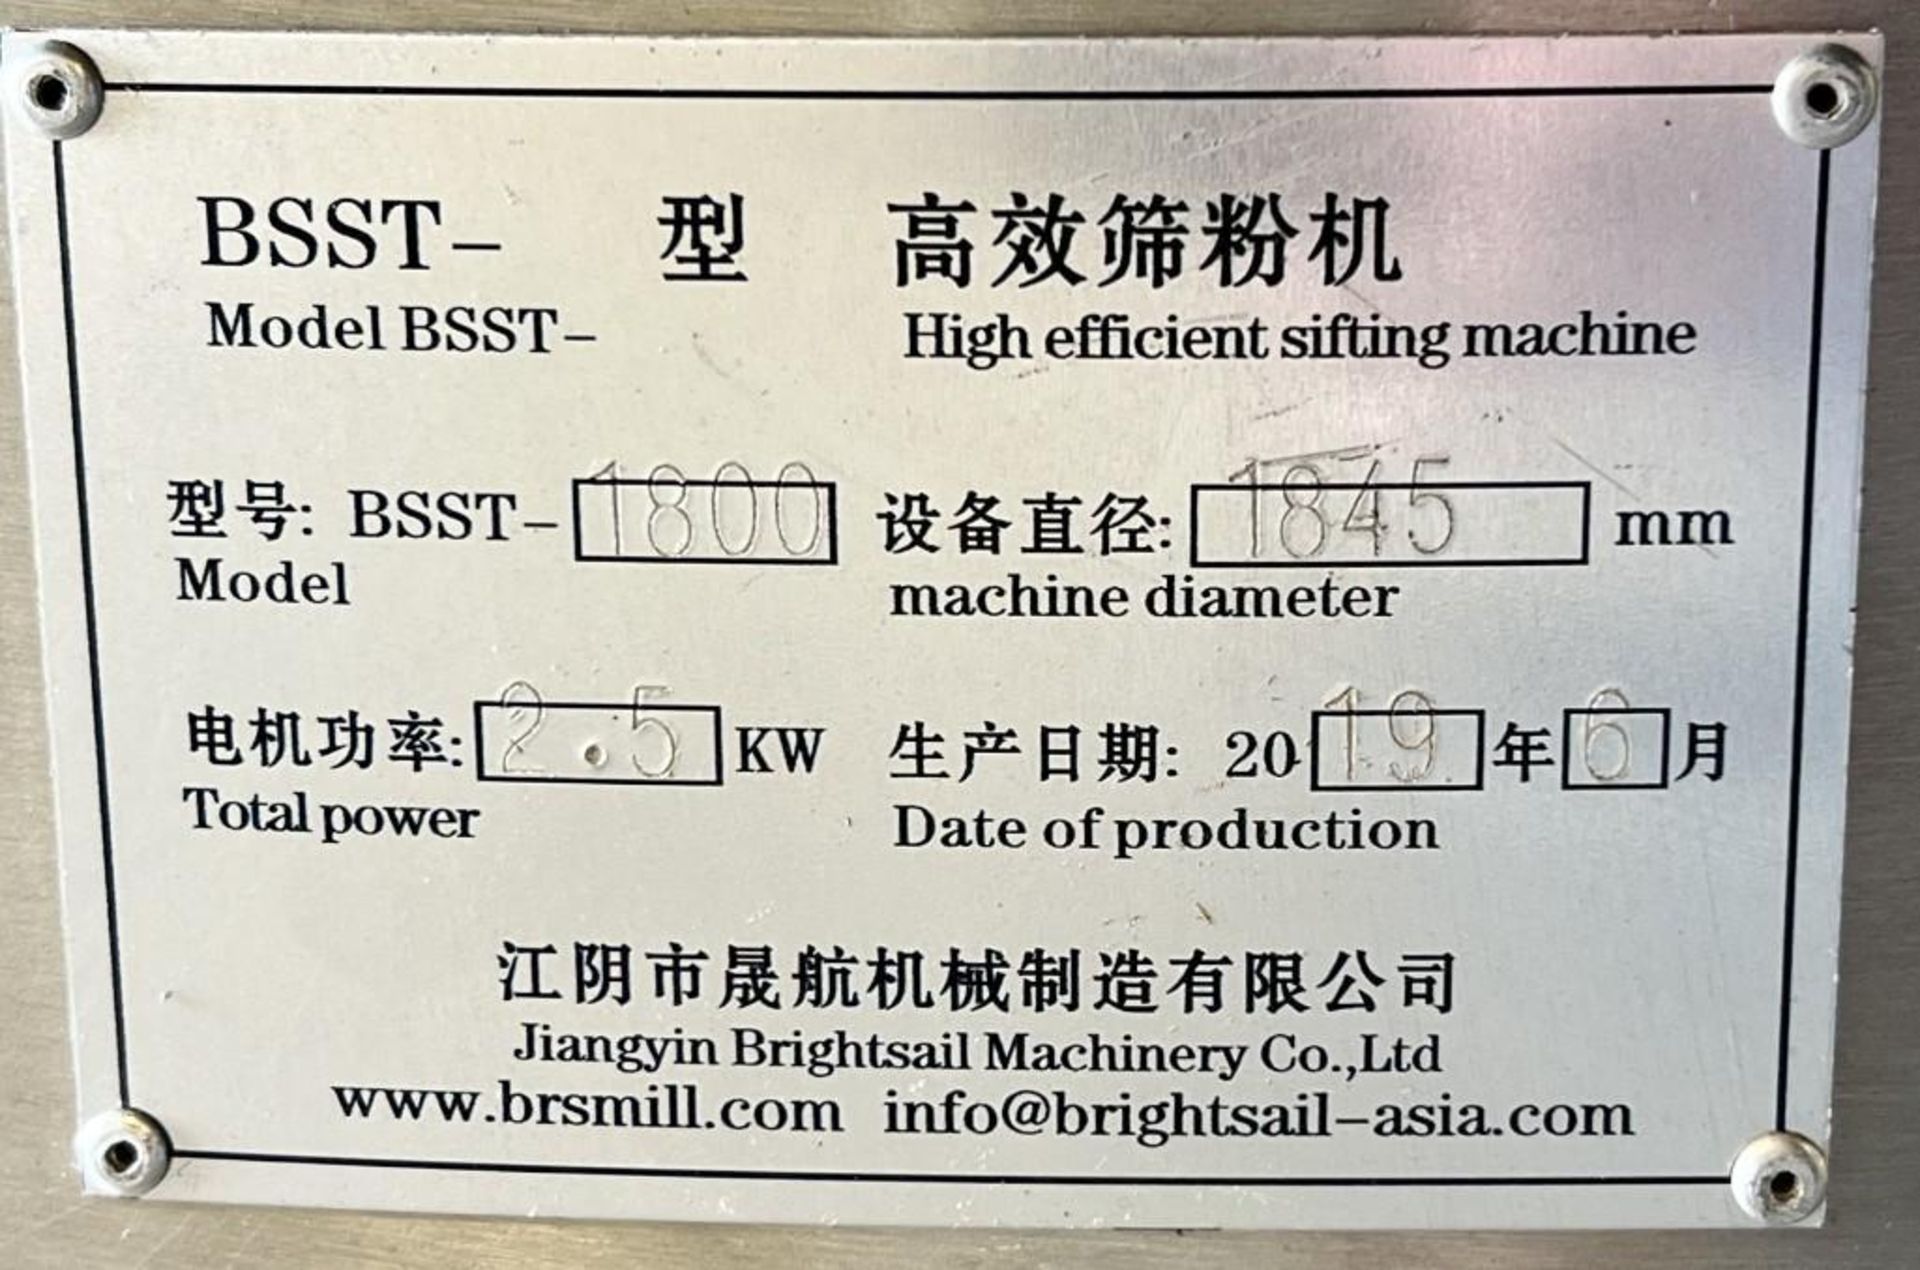 Brightsail Machinery Stainless Steel 72" Sifter, Model BSST-1800, Built 06/2019. **SEE LOT# 39 FOR P - Image 7 of 7